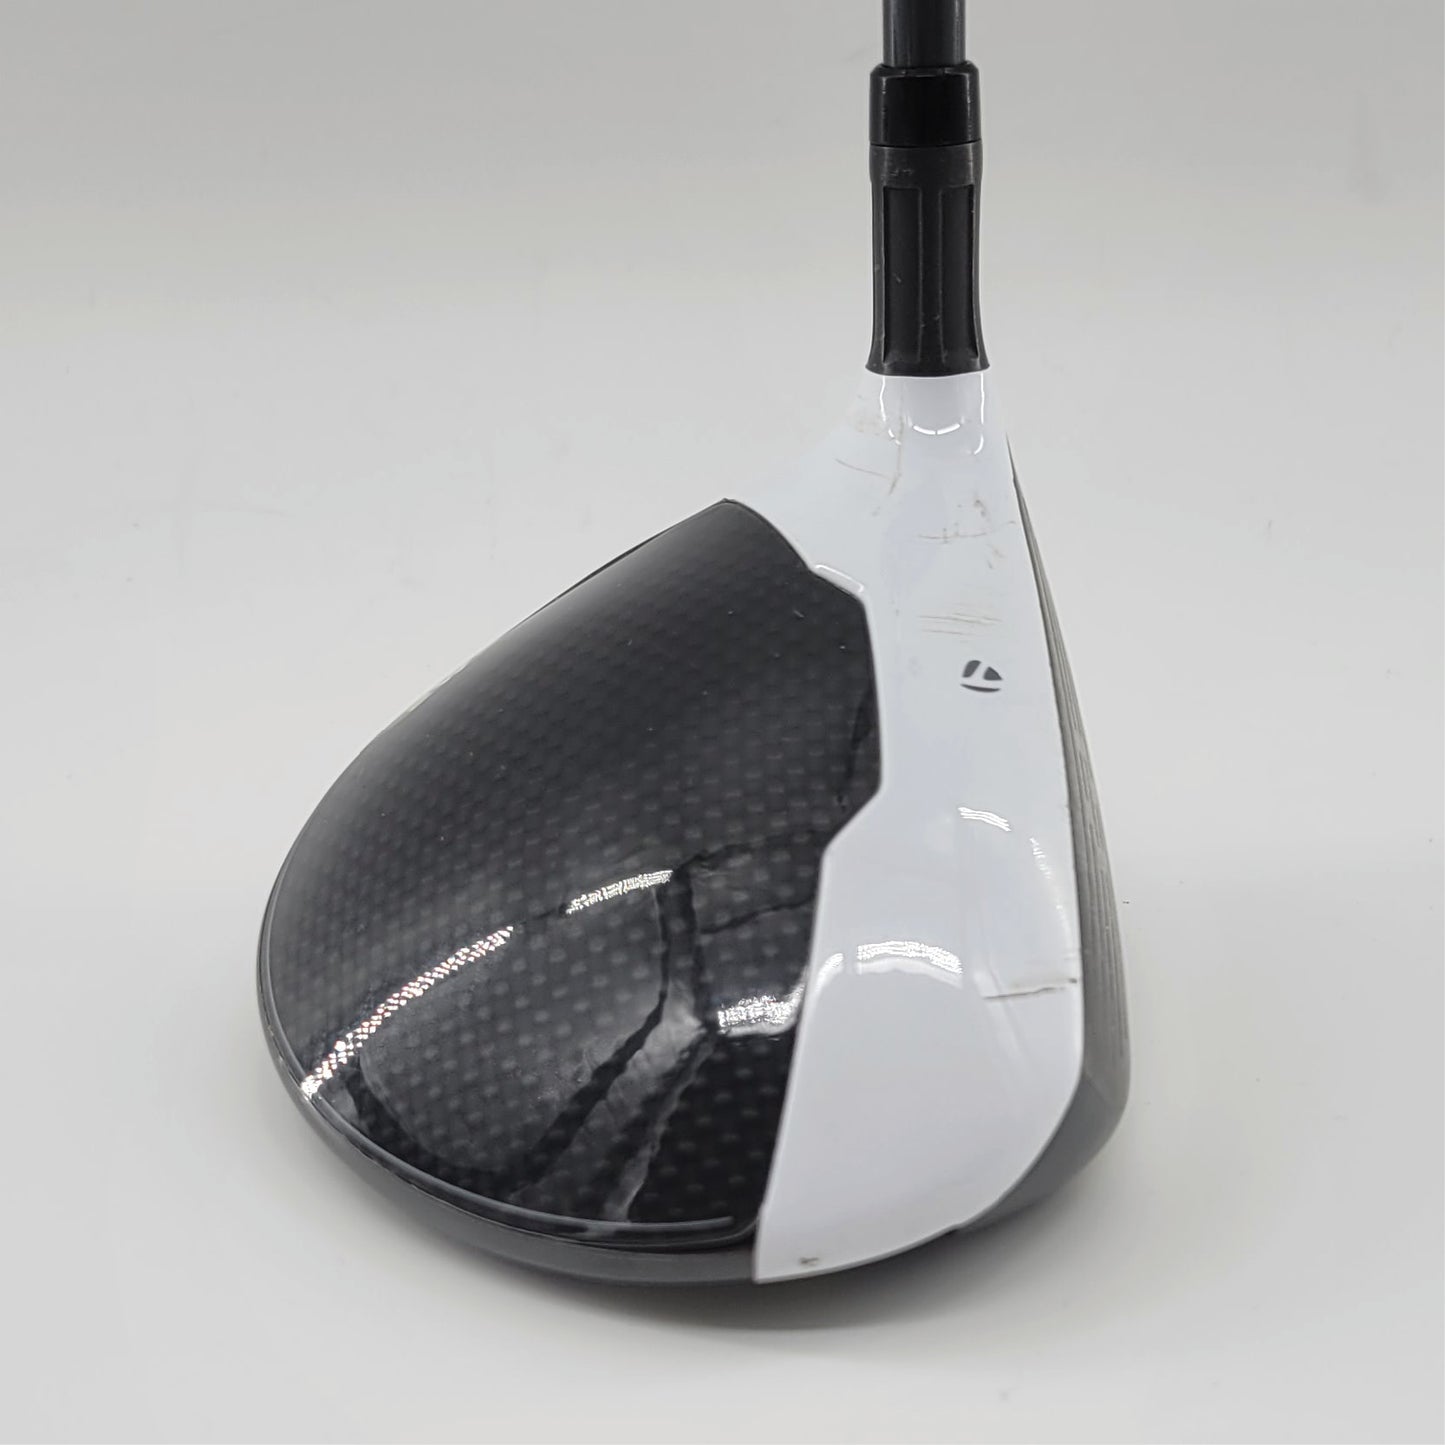 Taylormade M2 3 wood 15°